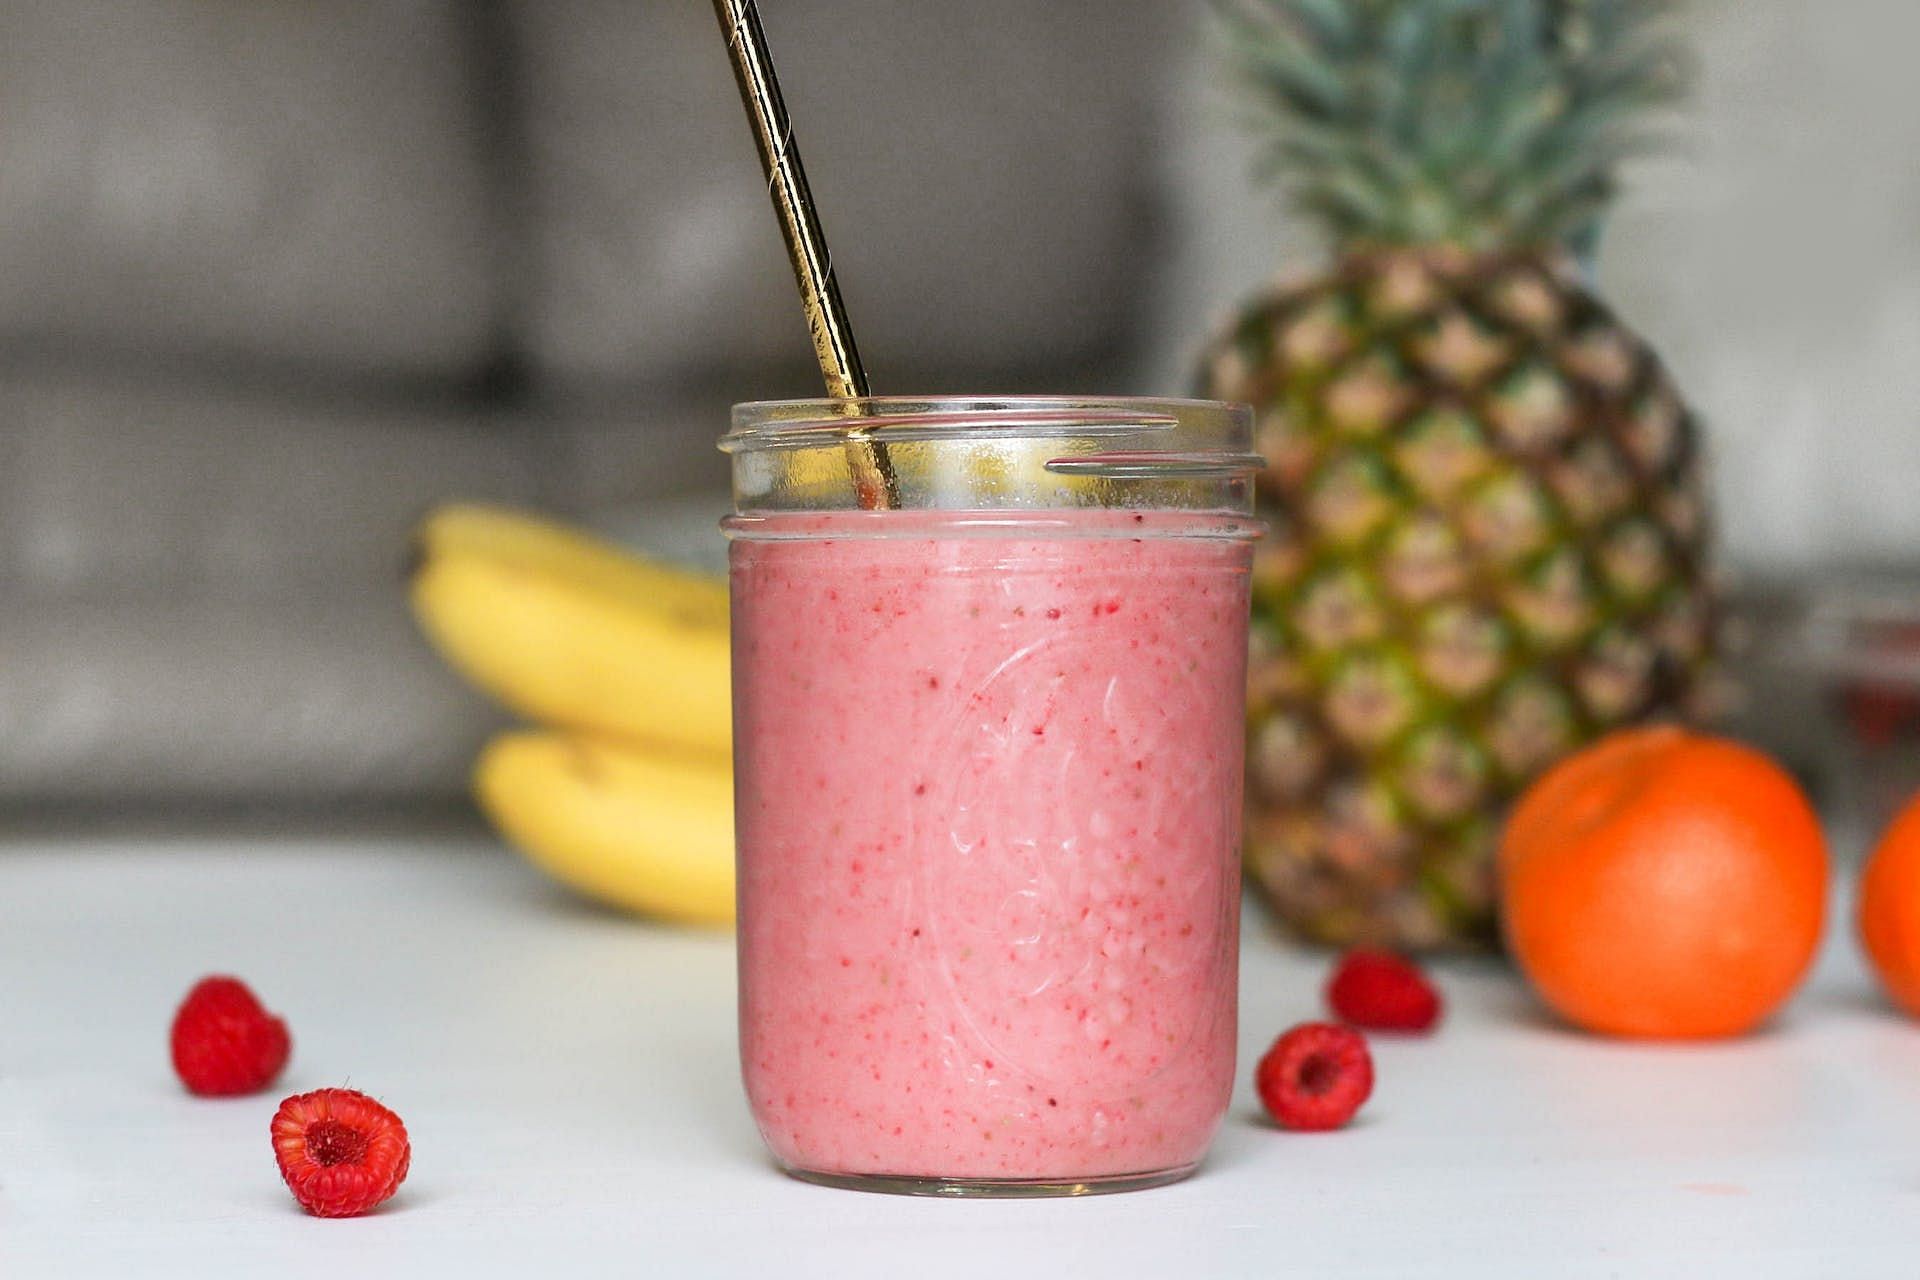 Smoothies contain flavored syrups and sugar. (Image via Pexels/Element5 Digital)